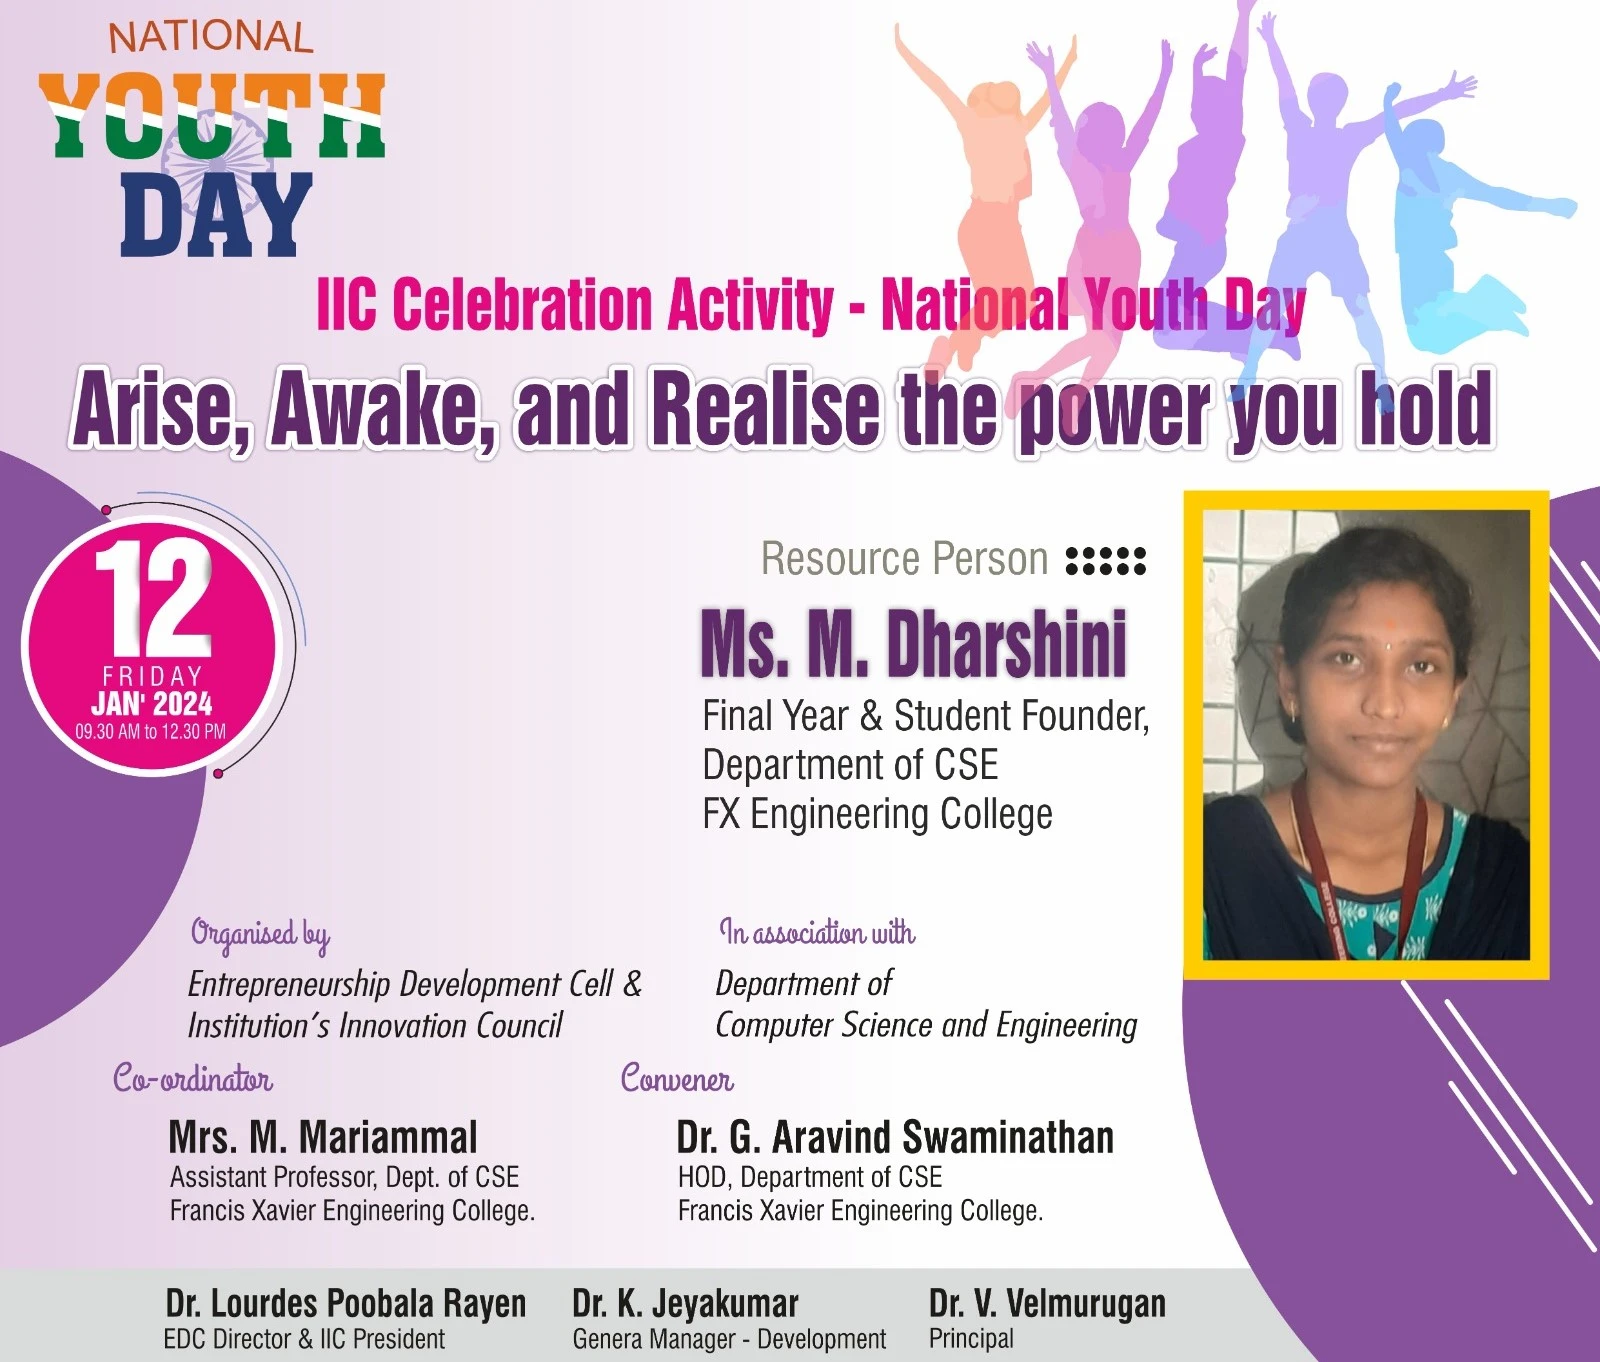 Arise, Awake and Realise the power you hold IIC Celebration Day Activity- National Youth Day